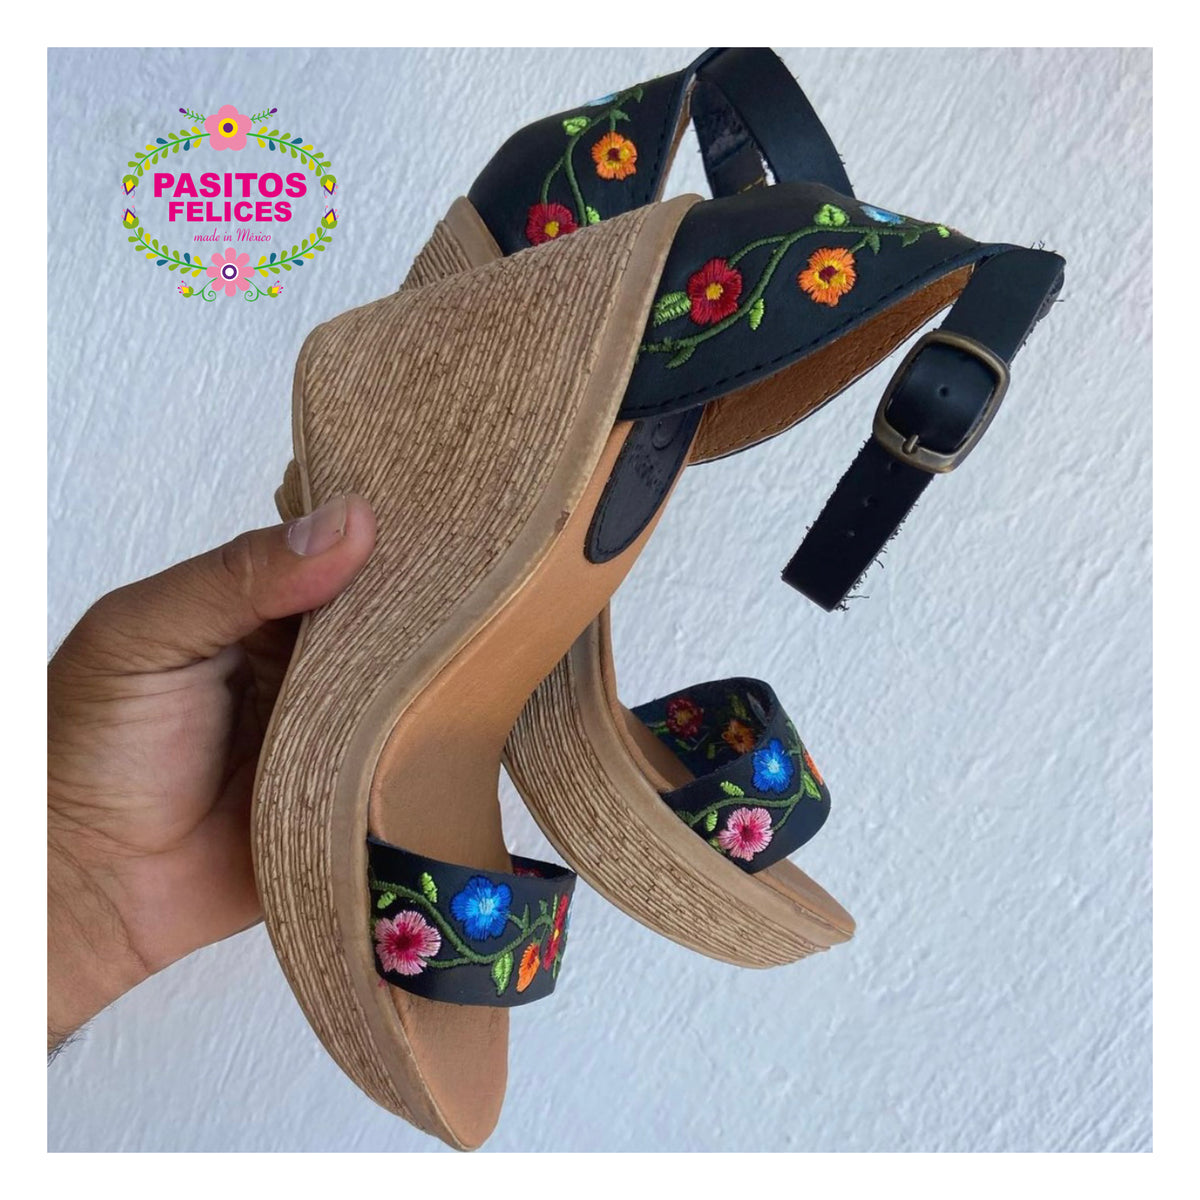 Oh! Floral Beaded Wedges – Solelovers